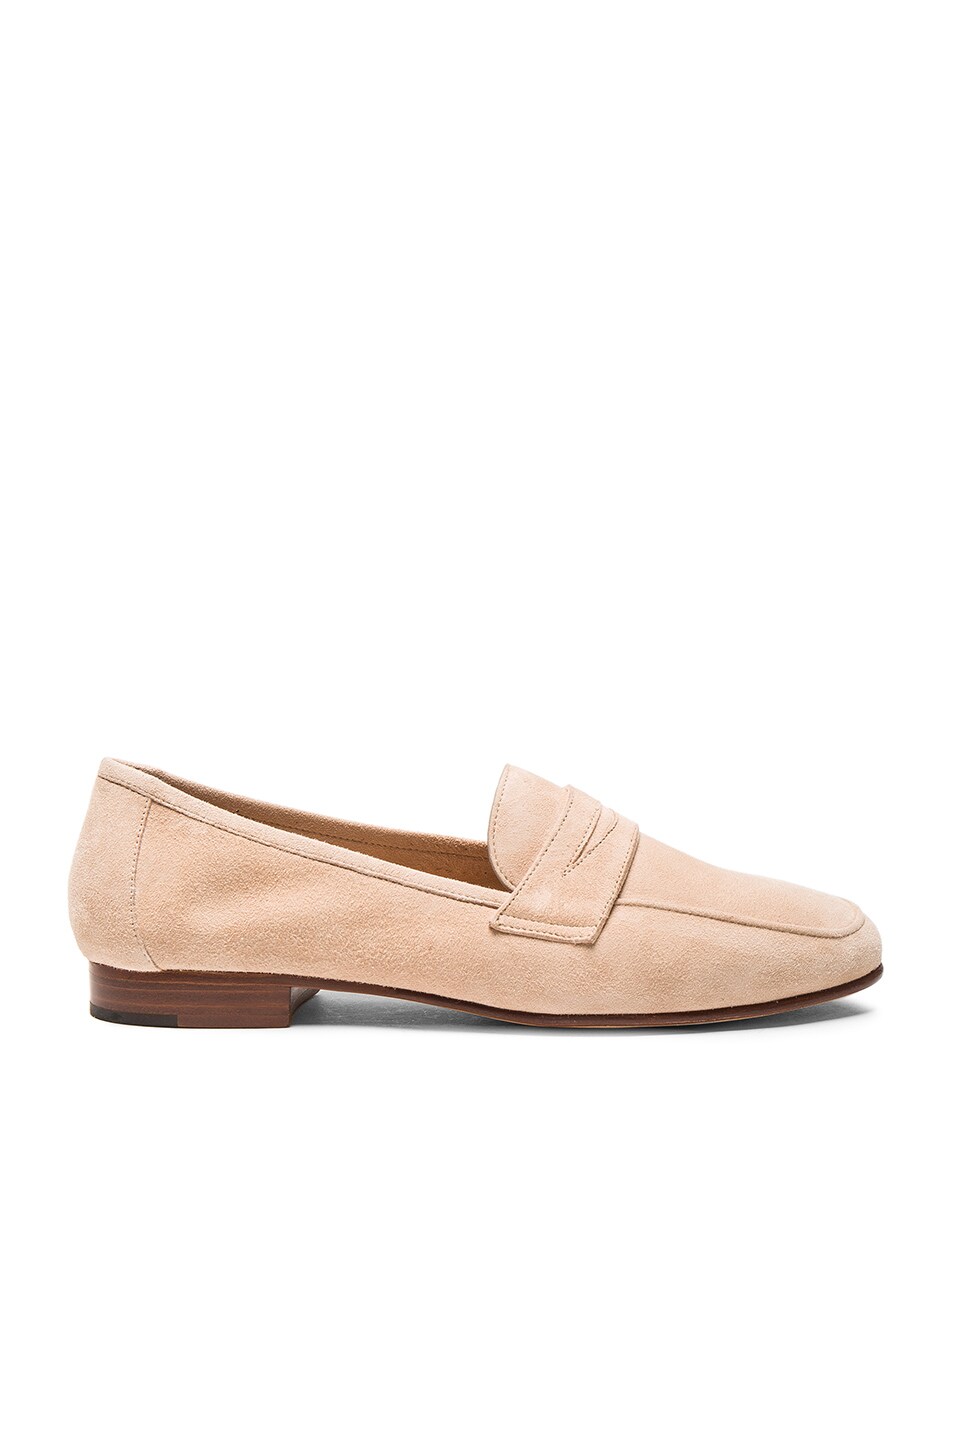 Image 1 of Mansur Gavriel Classic Suede Loafers in Sand Suede